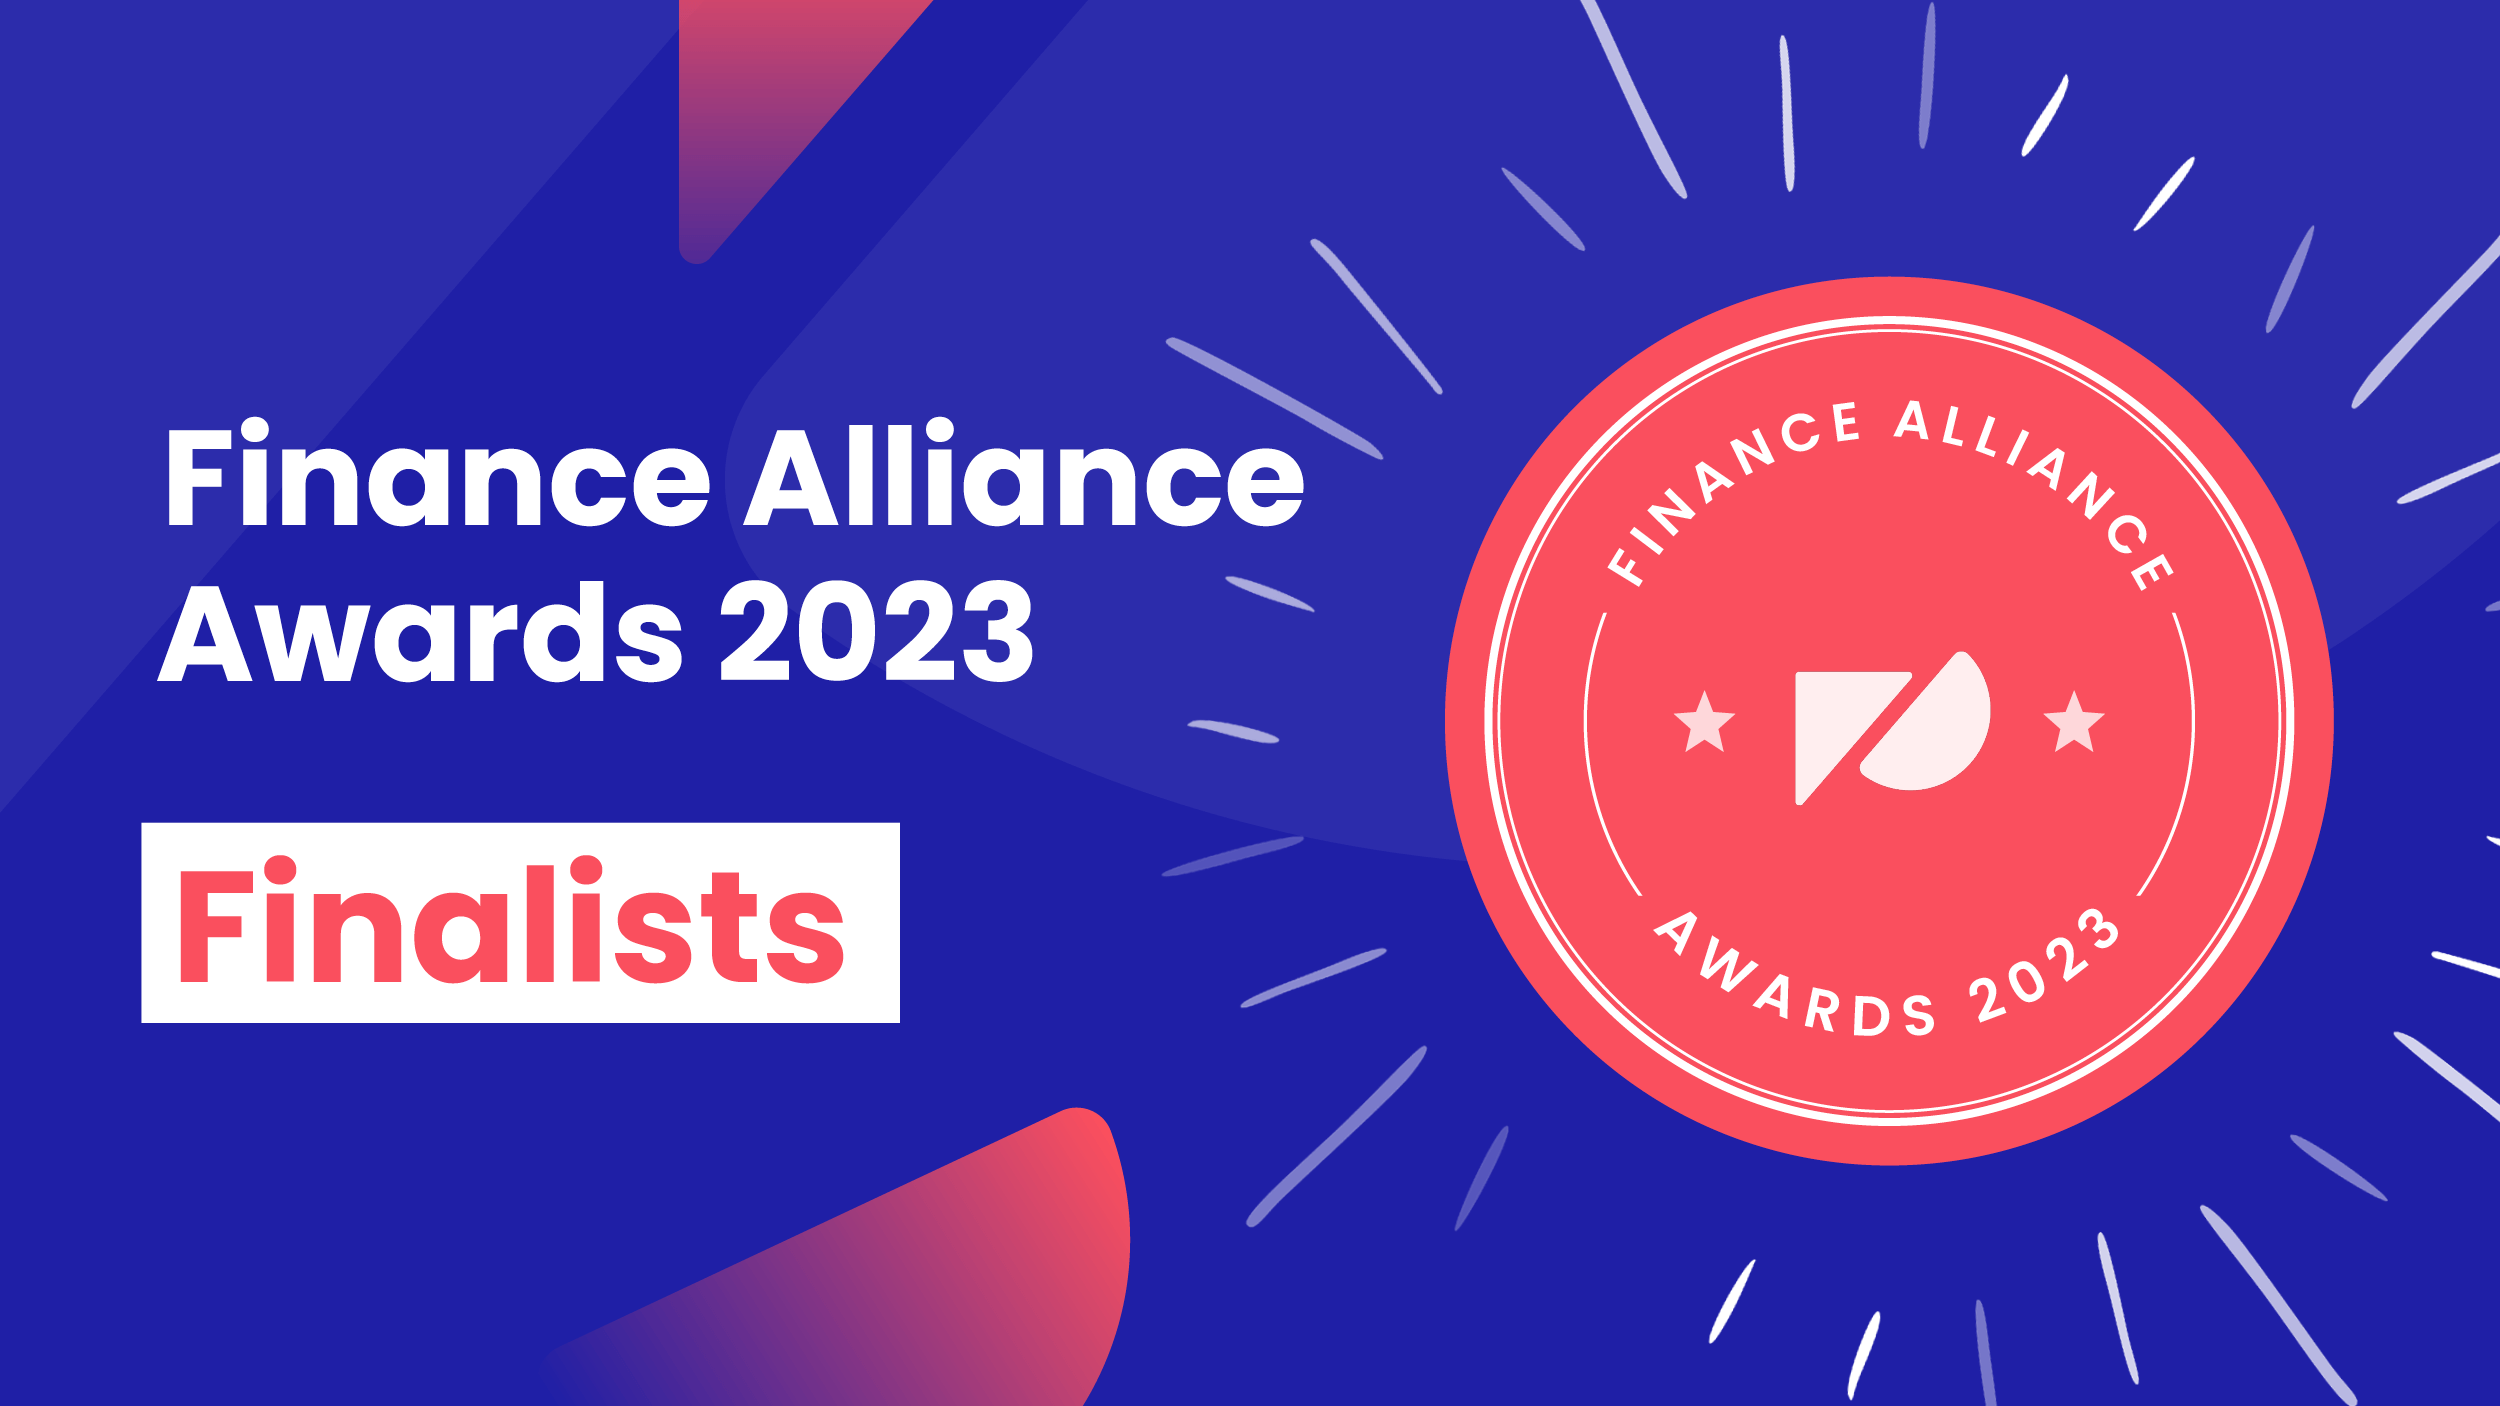 Introducing your finalists for the Finance Alliance Awards